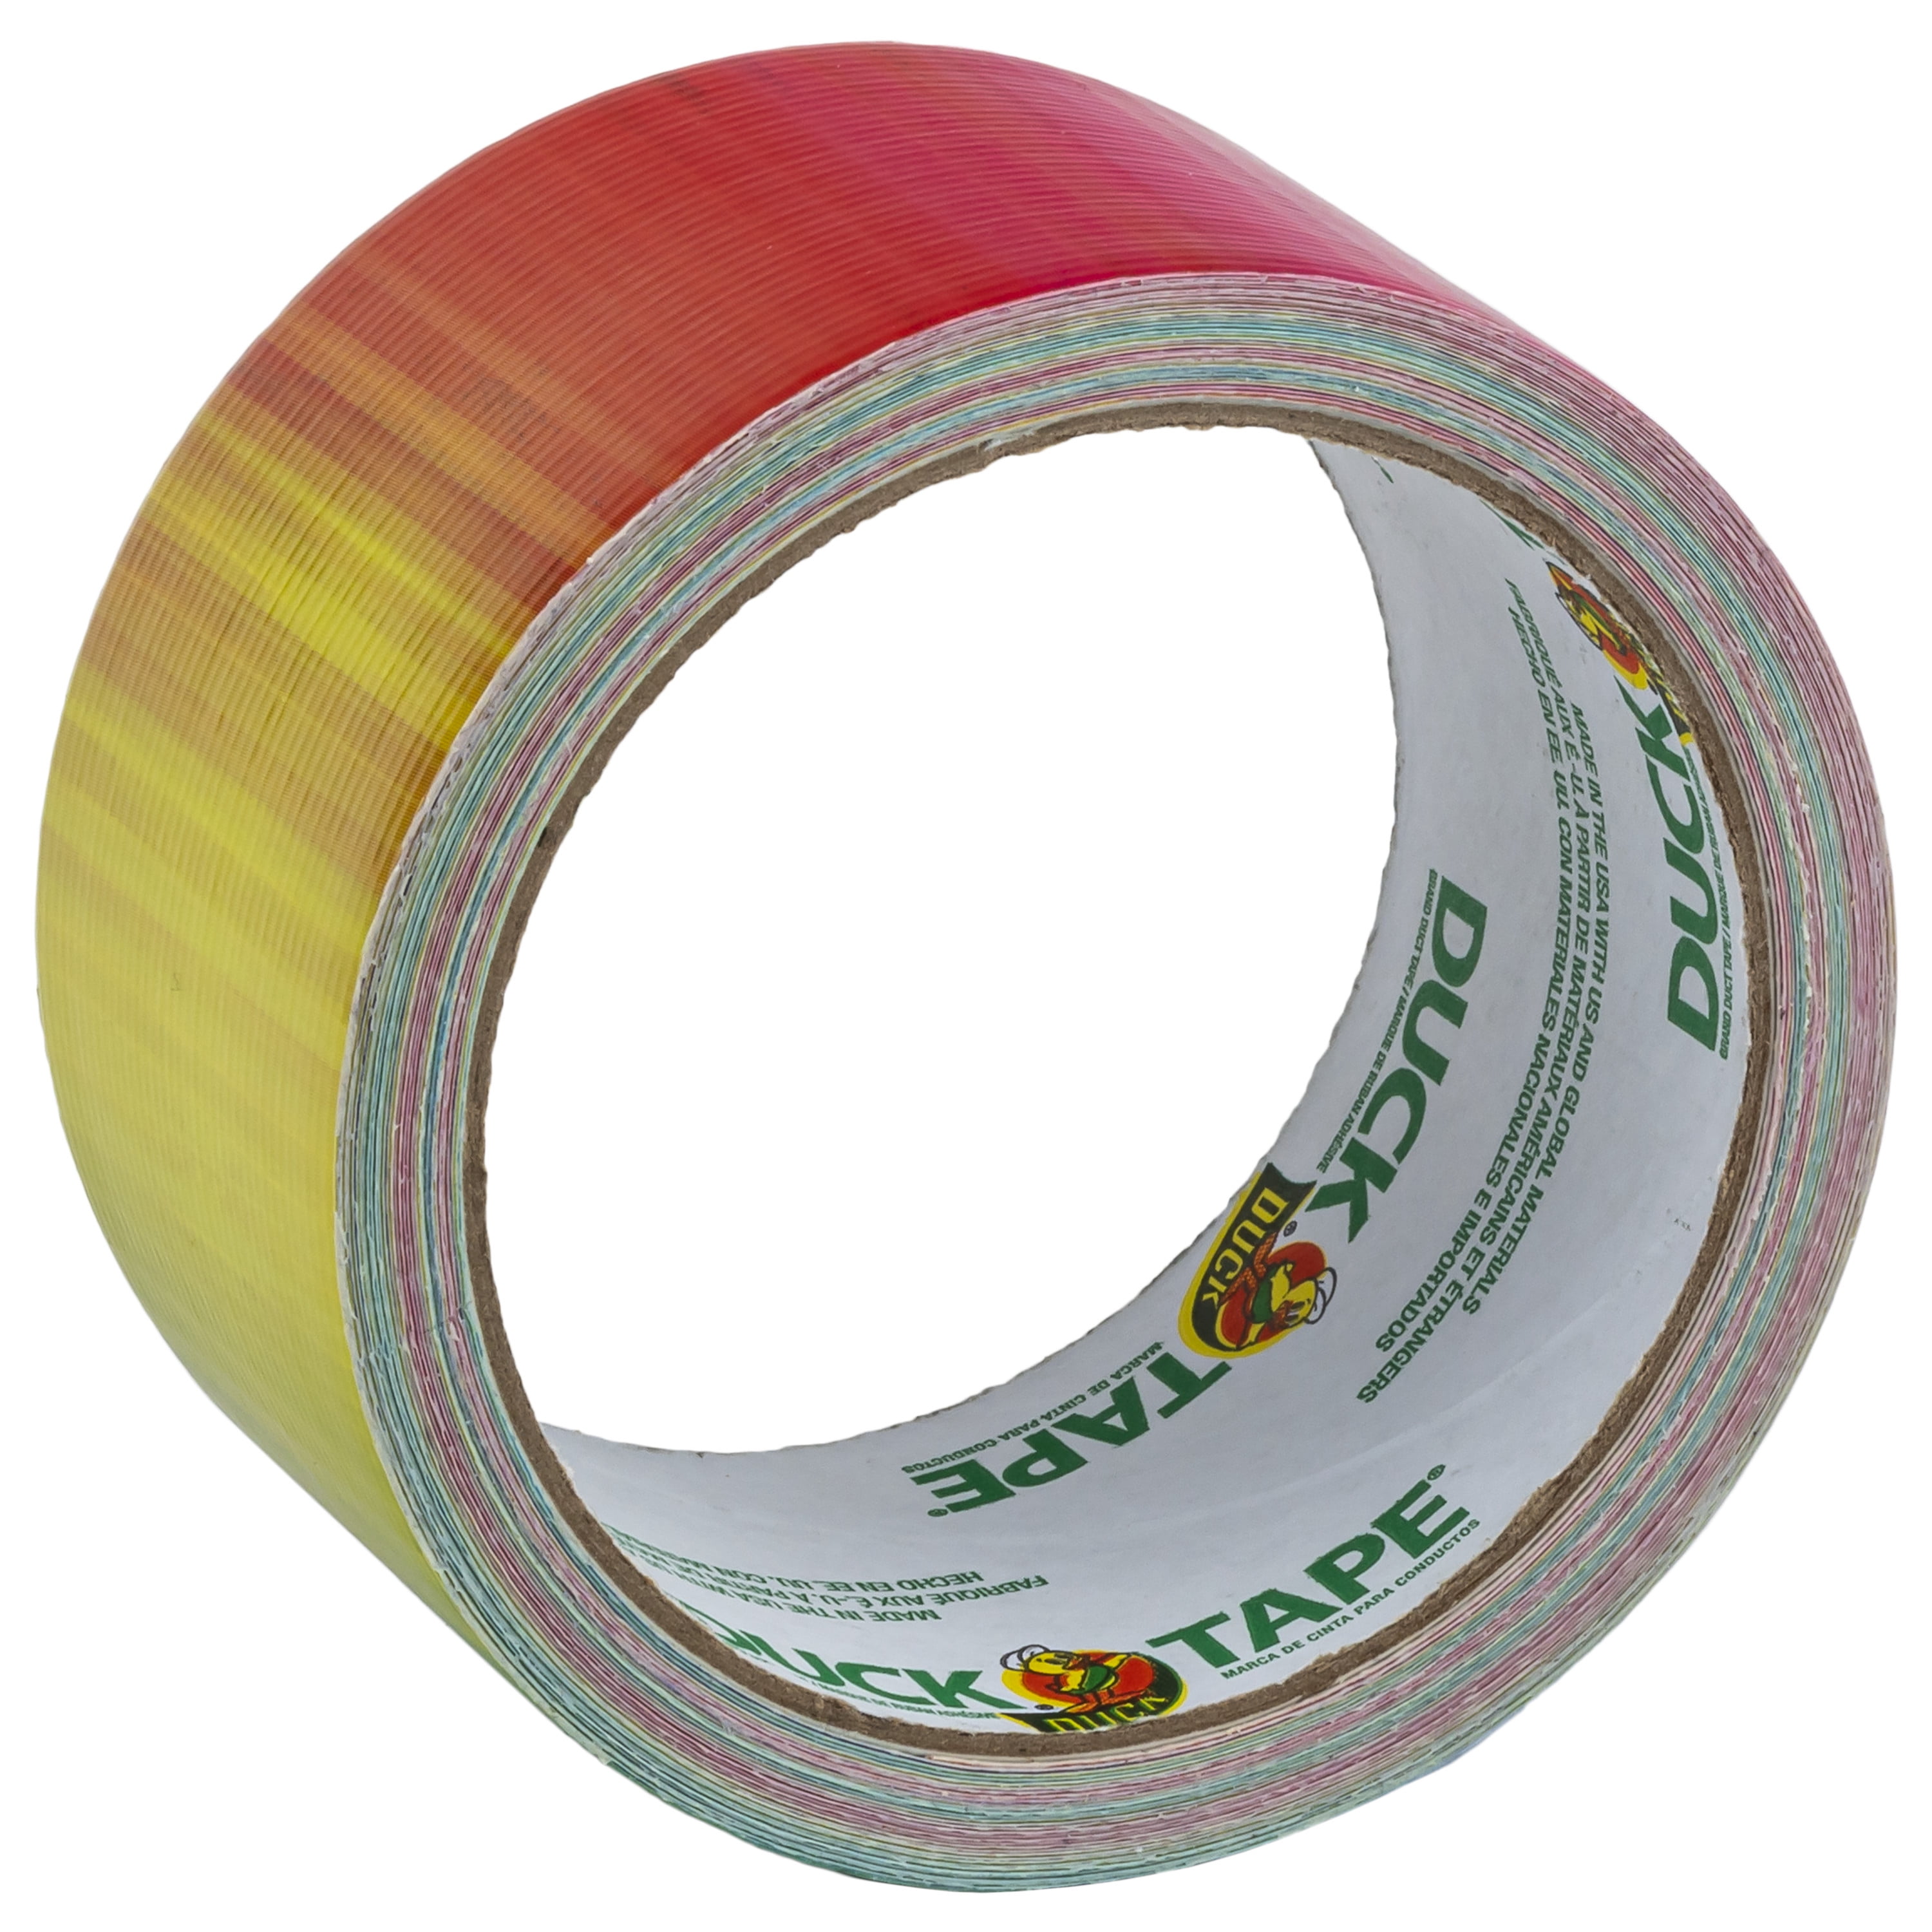 Duct Pride - Rainbow Tape | 1.88 in x 10 yds a Roll | Vibrant Bright Colors  | Easy to Tear by Hand | Arts & Crafts | DIY Projects | Gay Progress